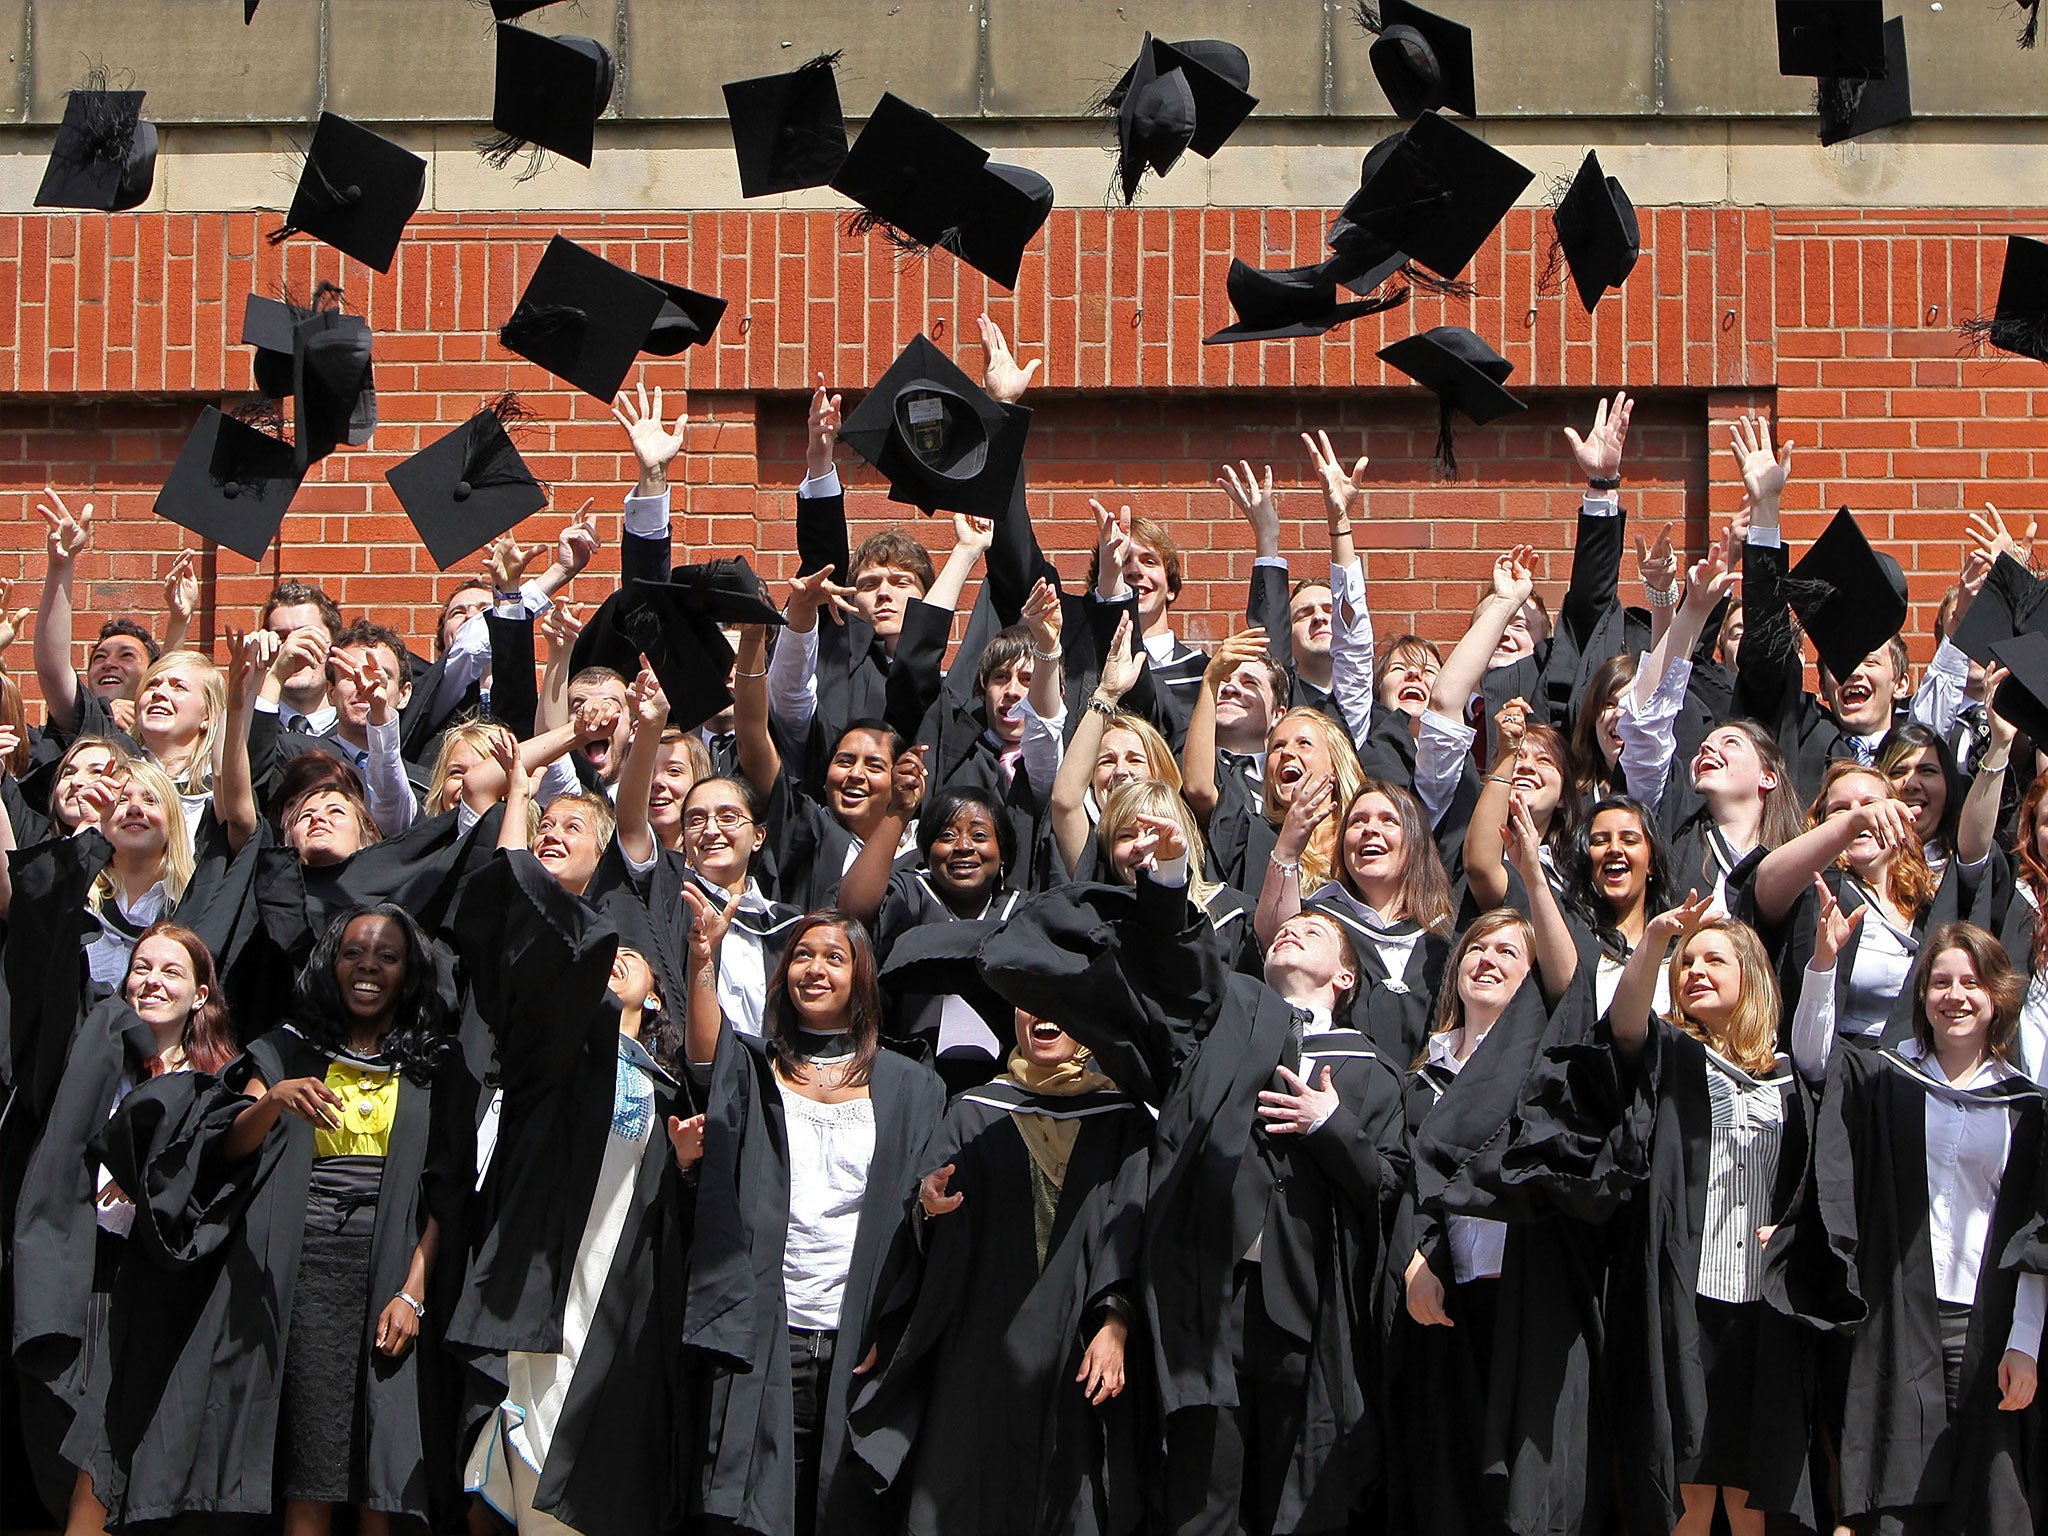 Students throw their mortarboards in the air during their graduation photograph at the University of Birmingham